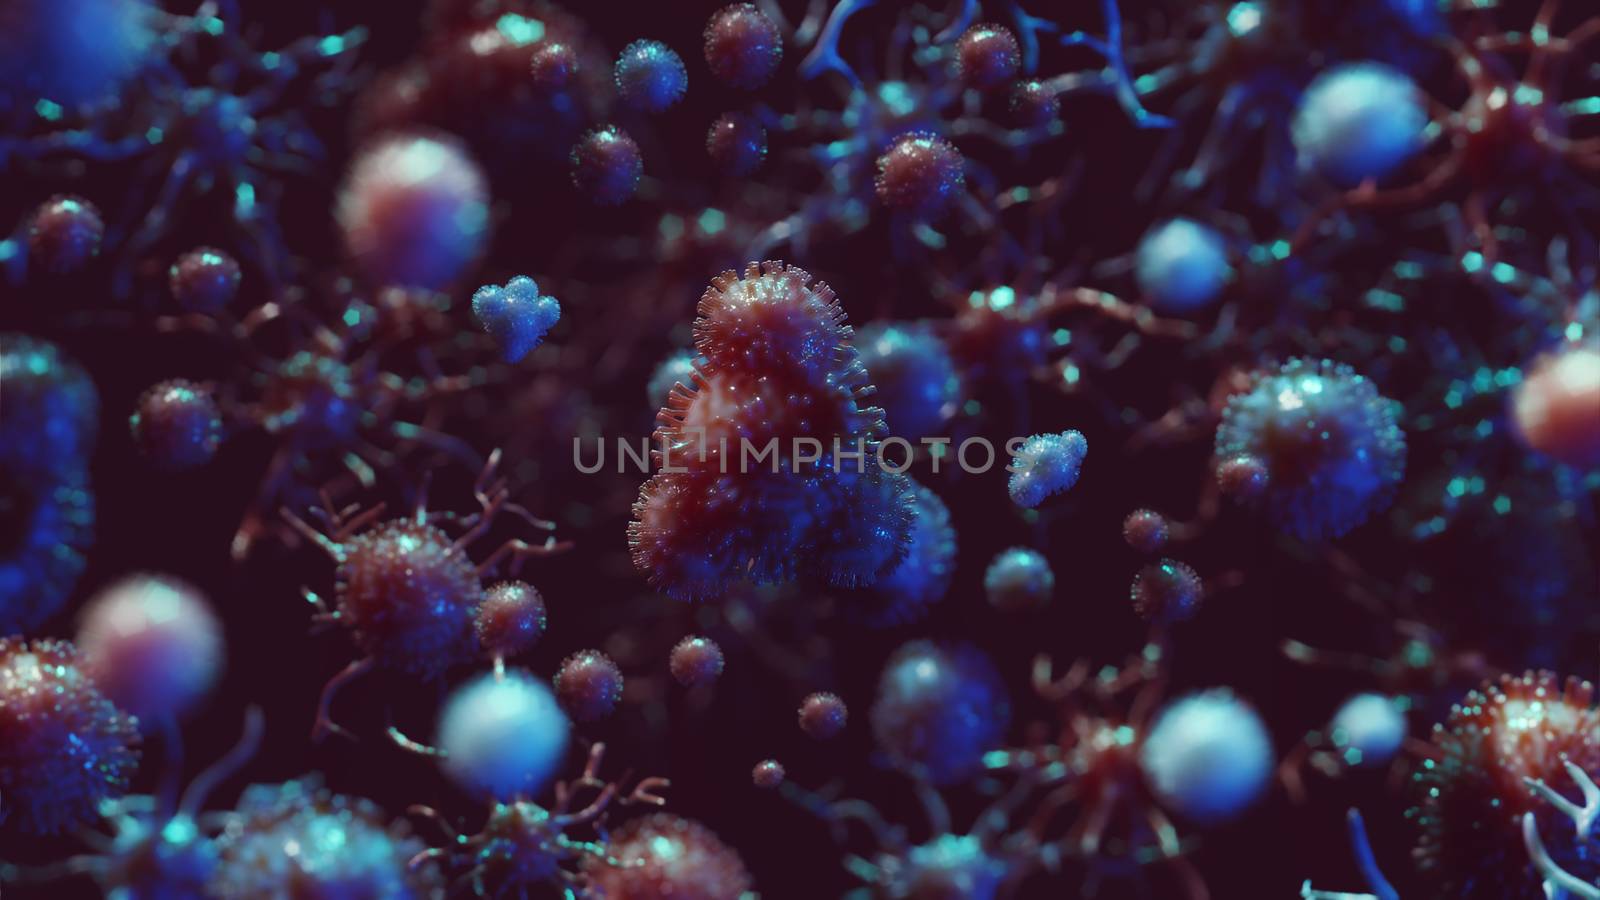 Viruses, coronavirus or bacteria cell in close up by DCStudio